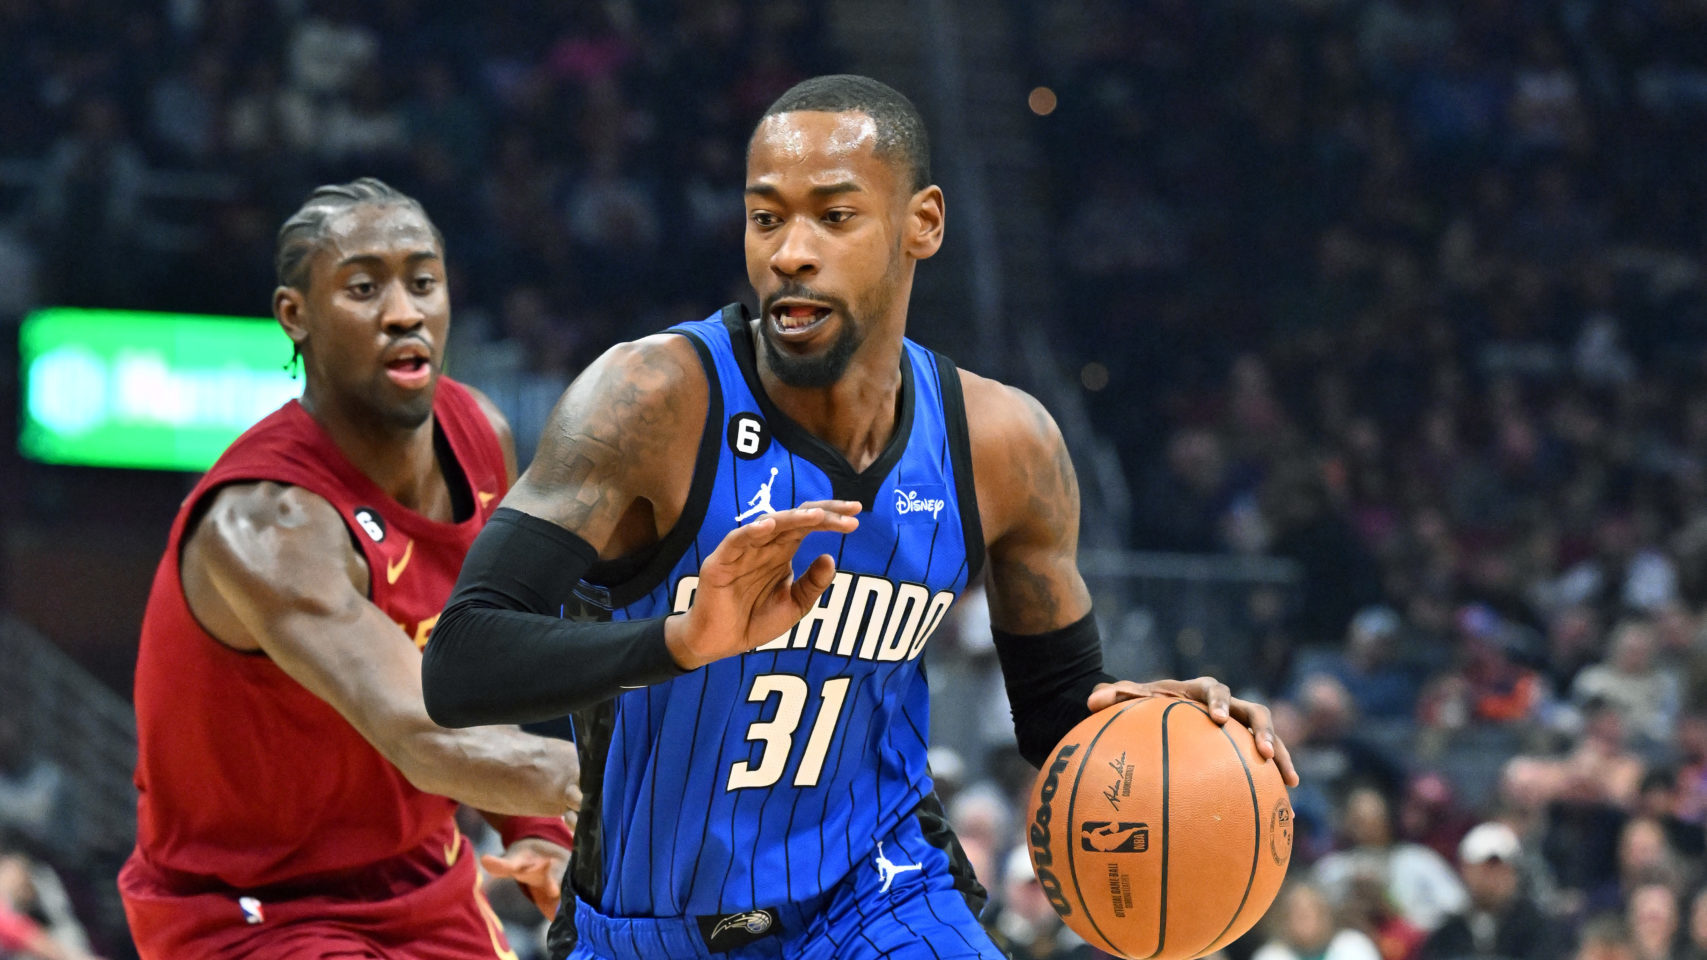 Terrence Ross #31 of the Orlando Magic drives to the basket past Caris LeVert #3 of the Cleveland C...